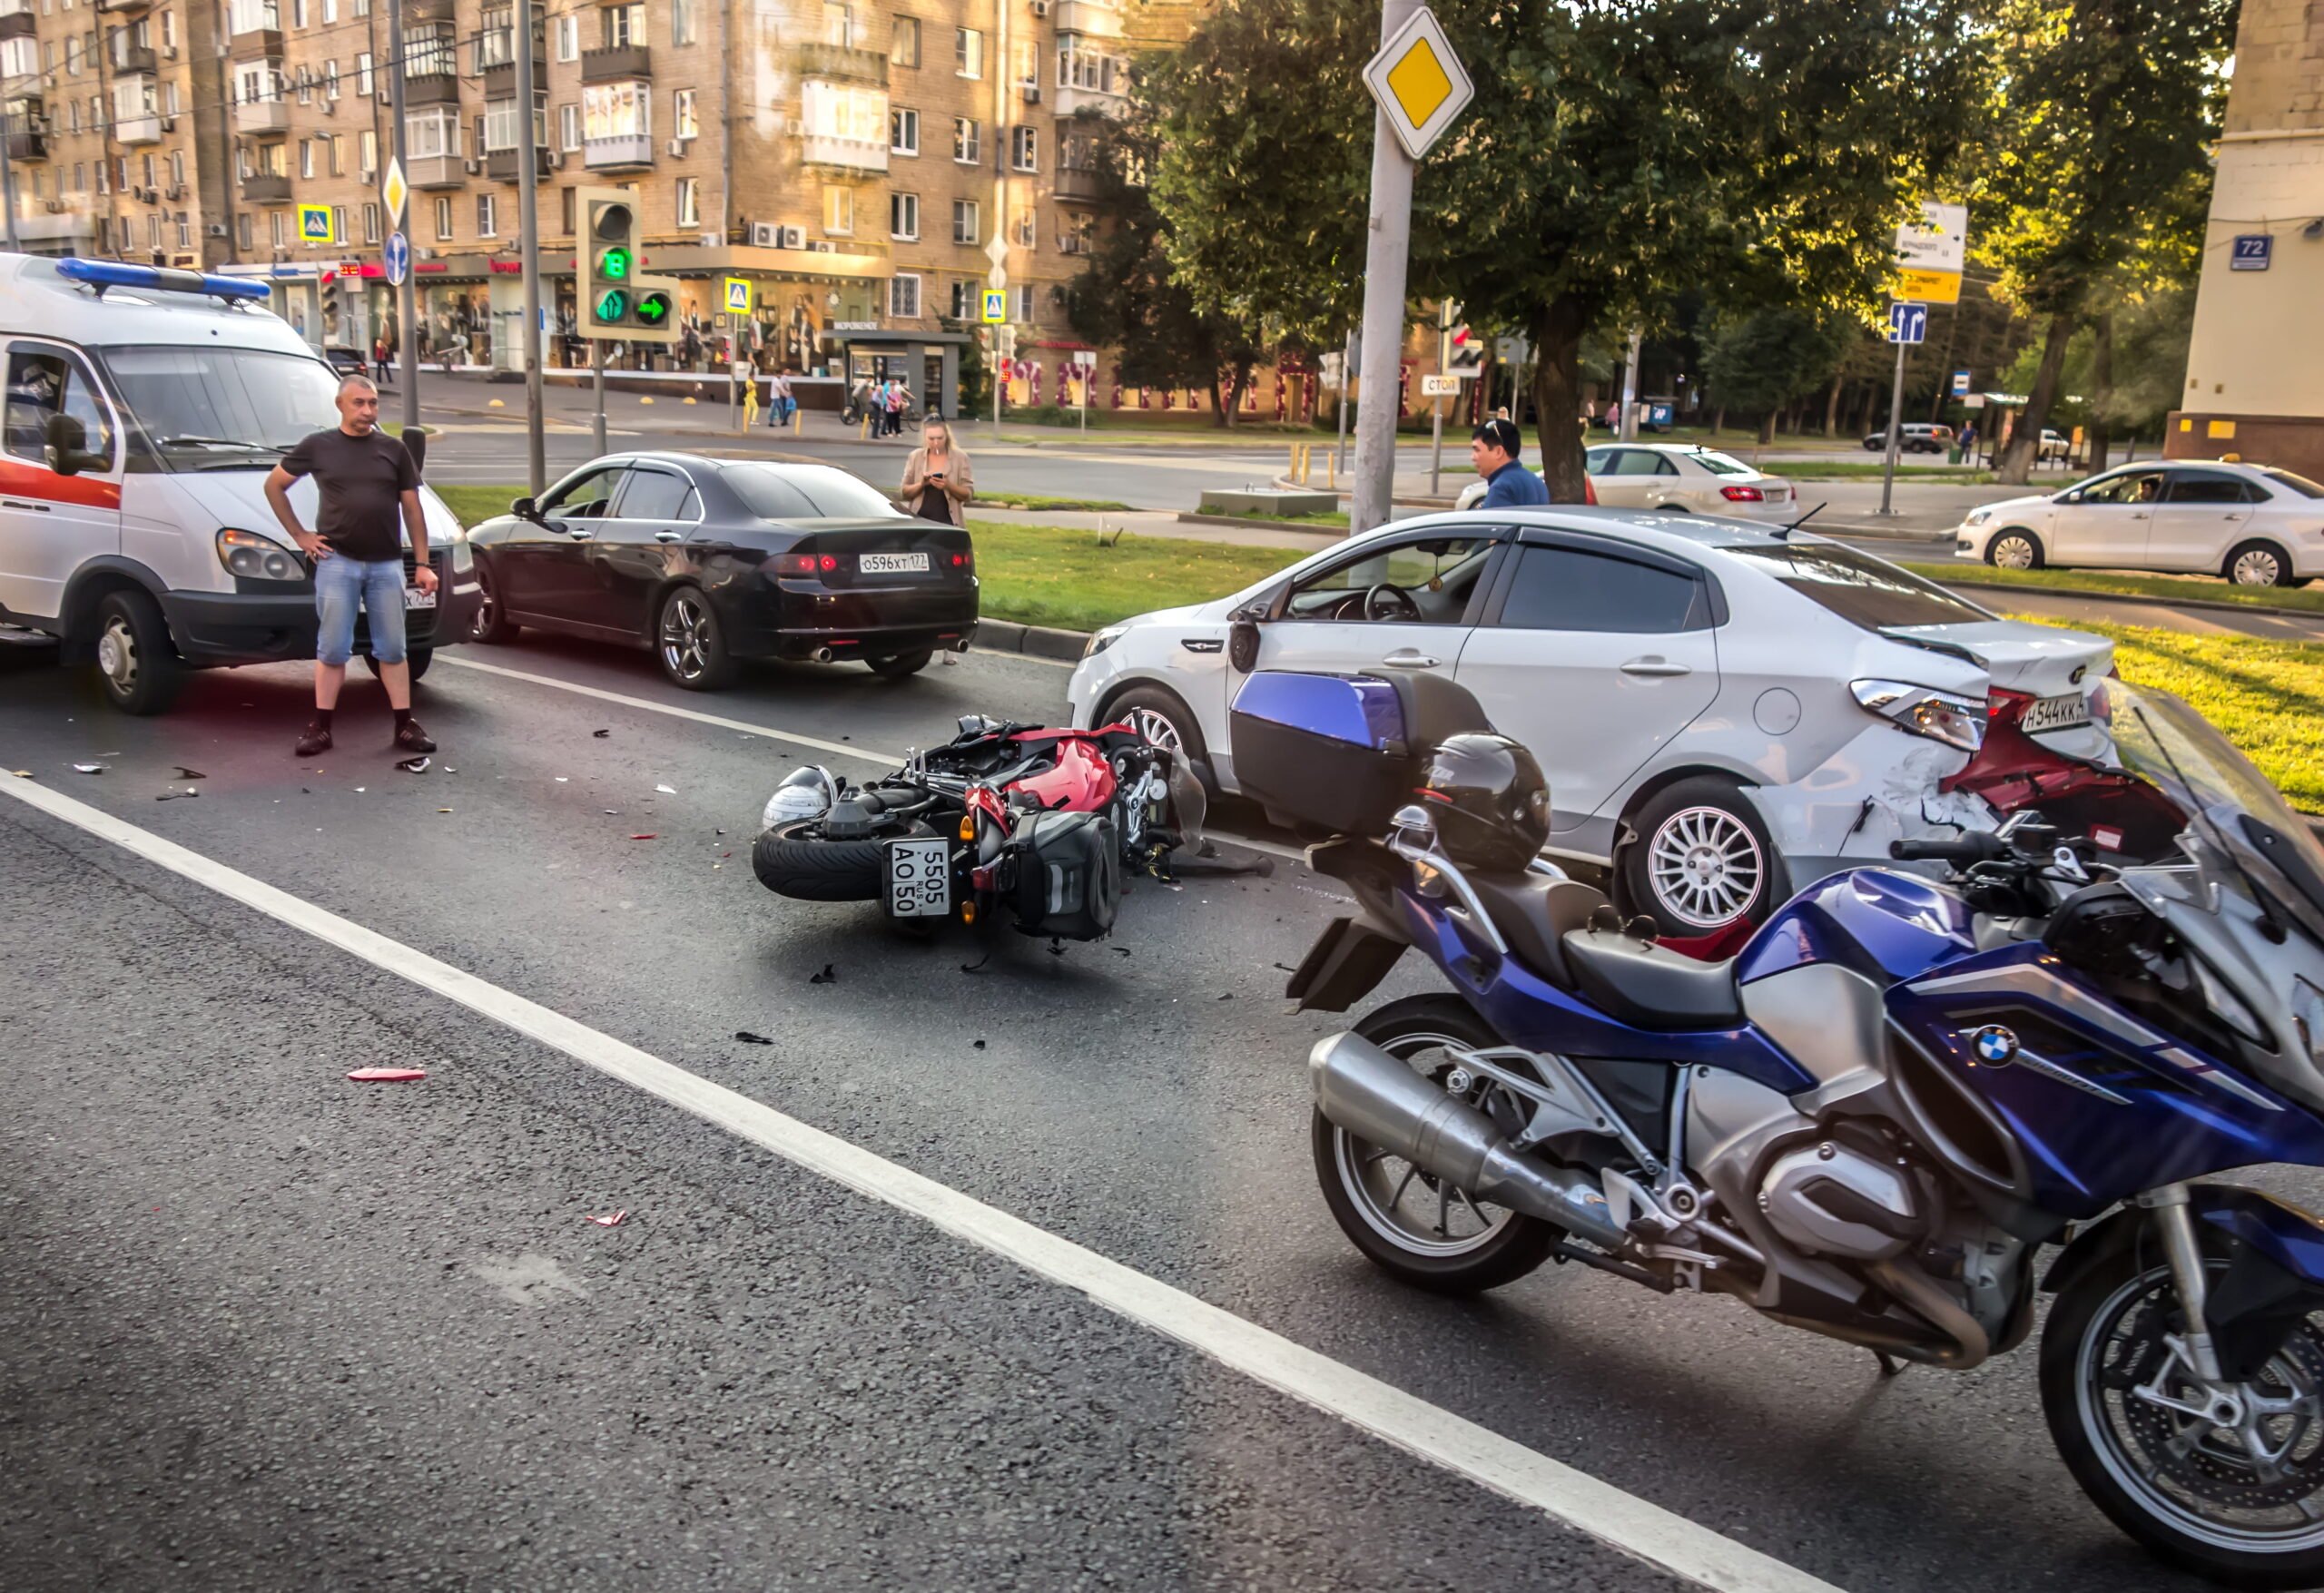 How To File a Motorcycle Accident Claim